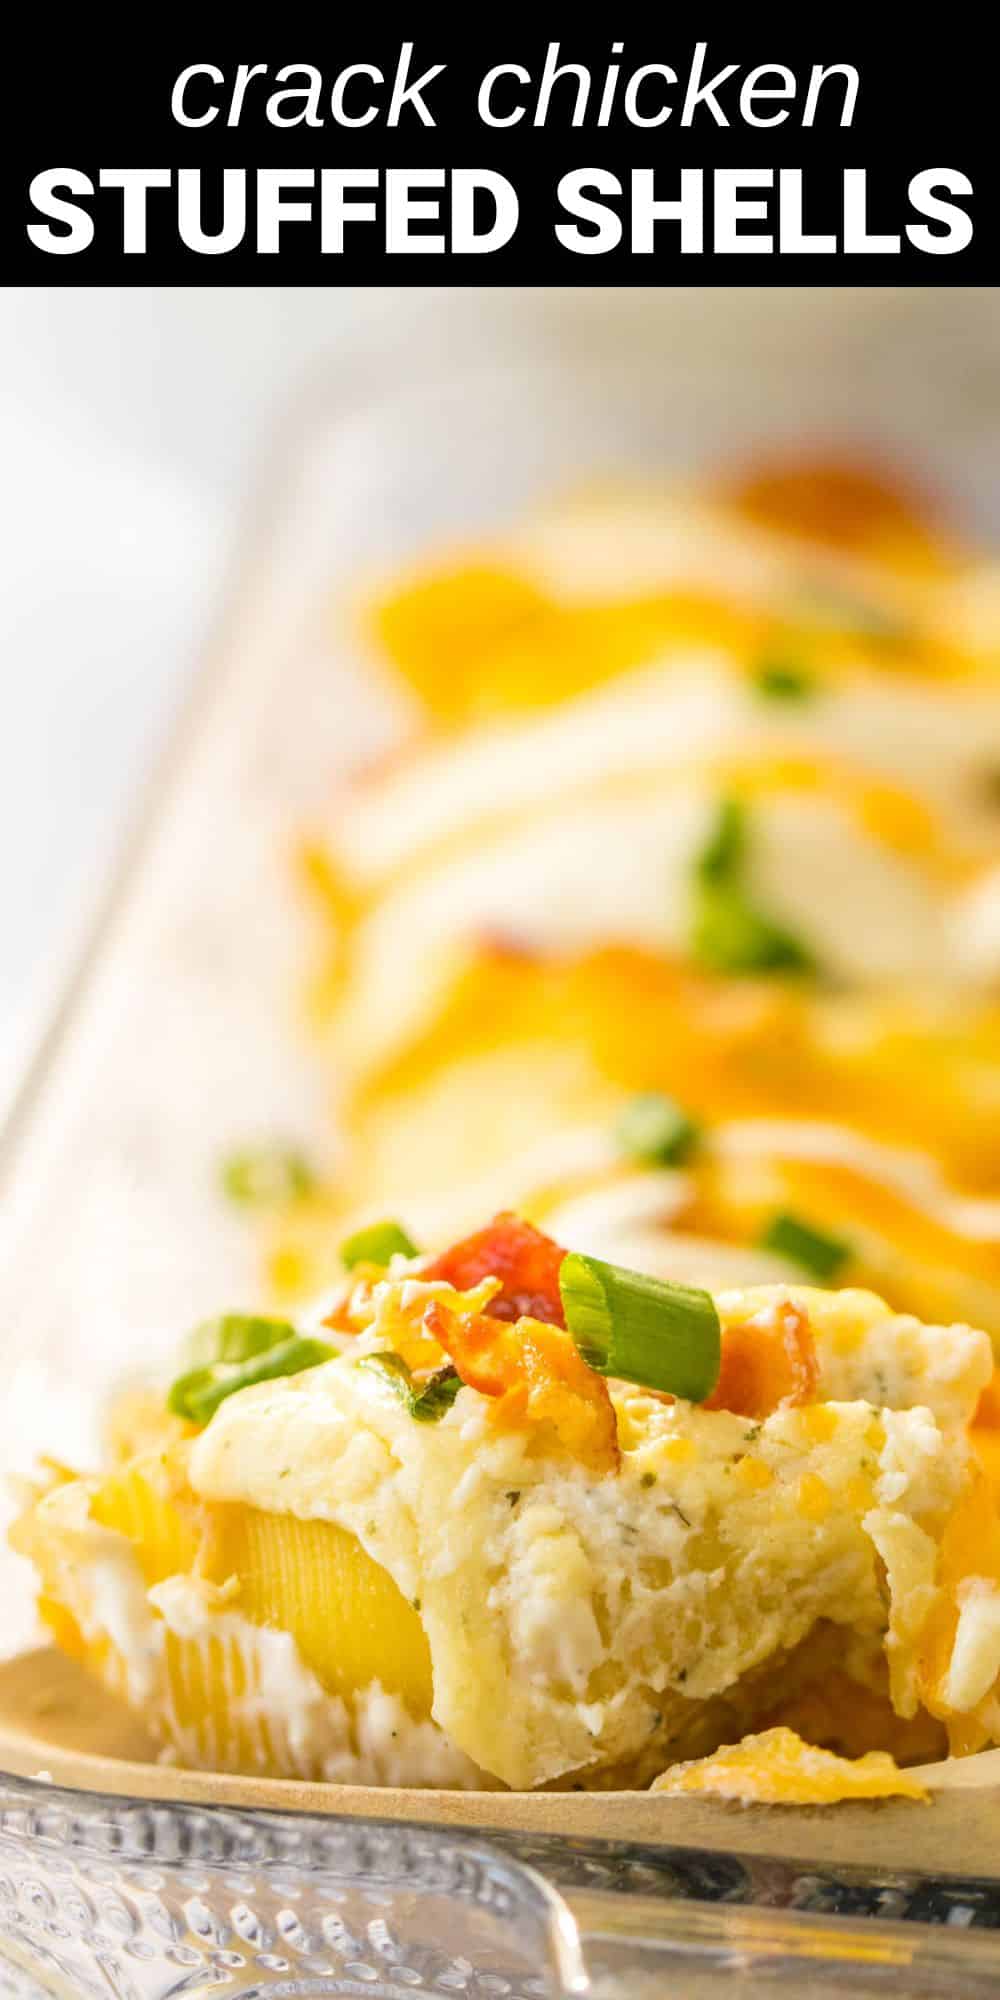 These Crack Chicken Stuffed Shells make the ultimate family favorite meal. Jumbo pasta shells are stuffed with tender chicken, bacon, cheese and mixed with a creamy sauce that has a delicious ranch flavor. The best part is this hearty meal is ready in an hour or less, perfect for busy weeknights.